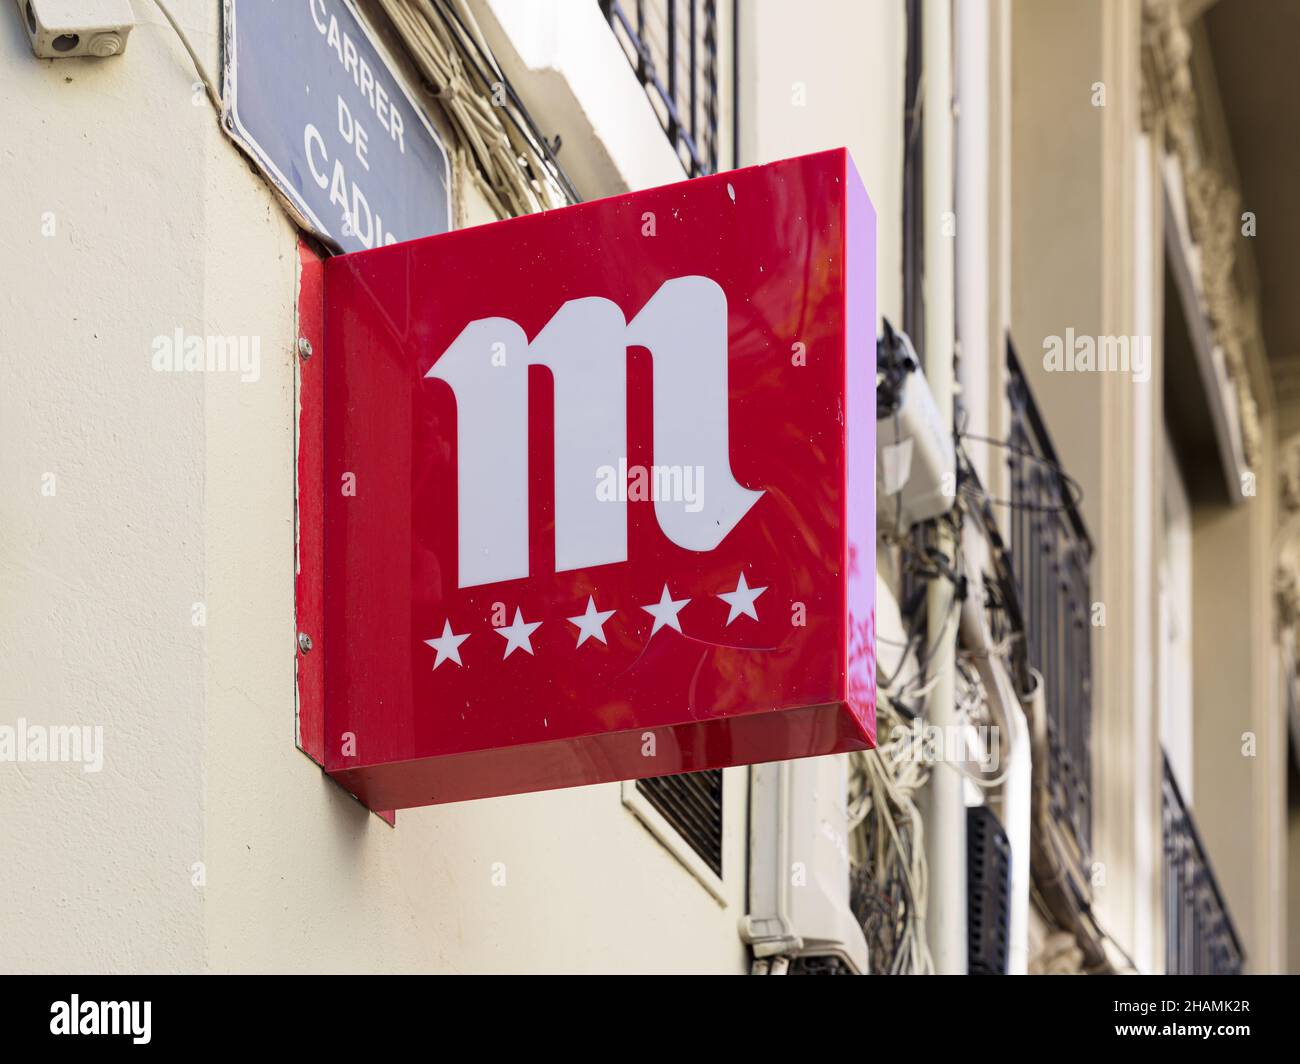 VALENCIA, SPAIN - DECEMBER 09, 2021: Mahou is a Spanish brewery founded in Madrid in 1890 Stock Photo